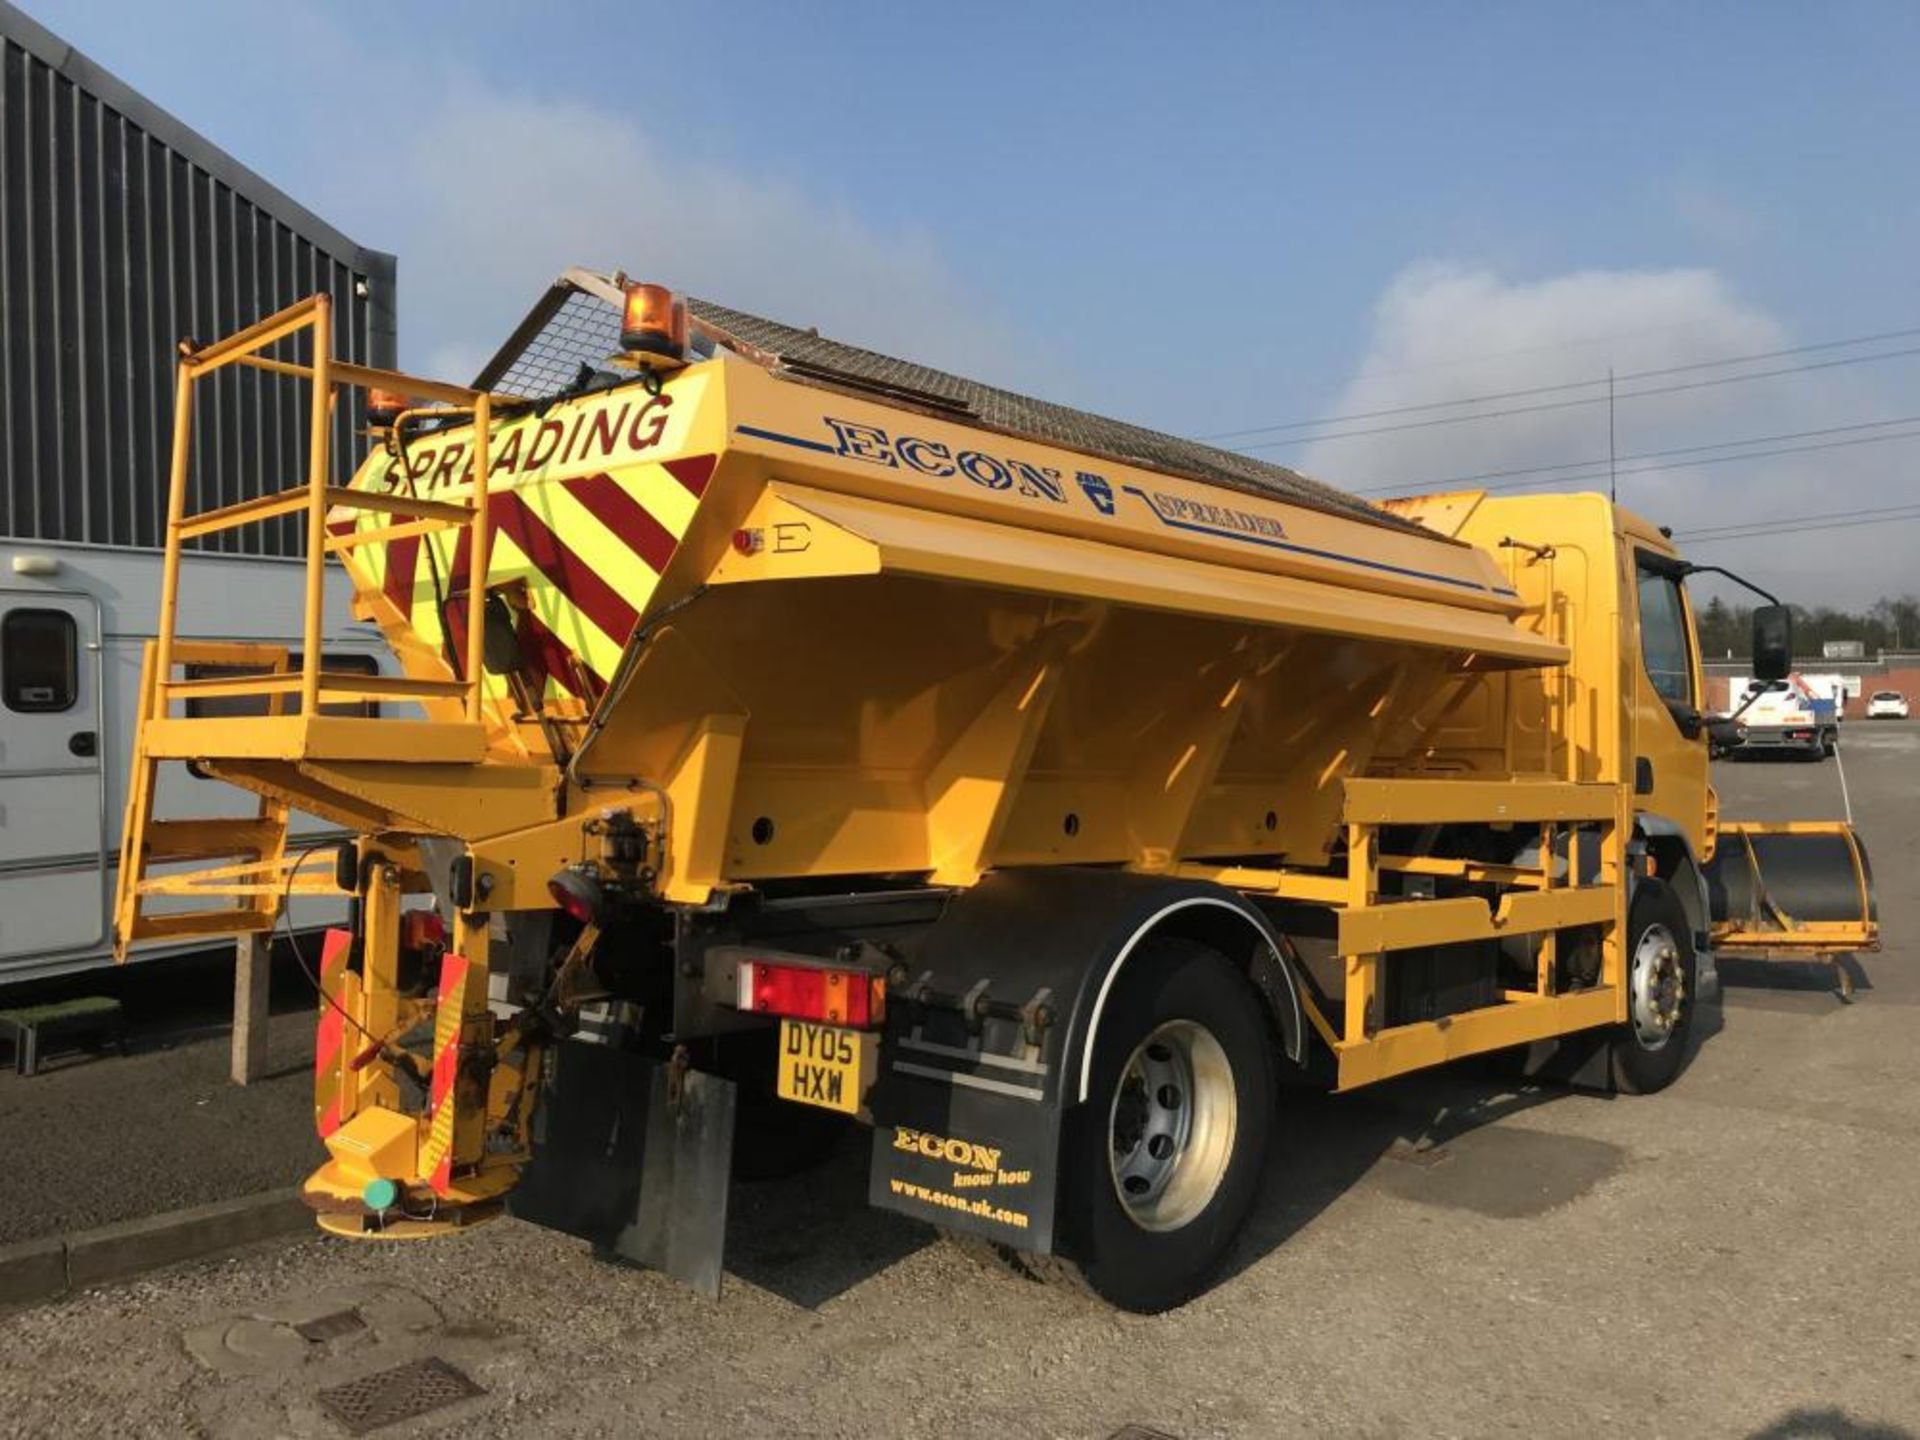 2005/05 REG DAF TRUCKS FA LF55.220 18 TON ECON BODY GRITTER WITH SNOW PLOUGH, EX COUNCIL *PLUS VAT* - Image 5 of 17